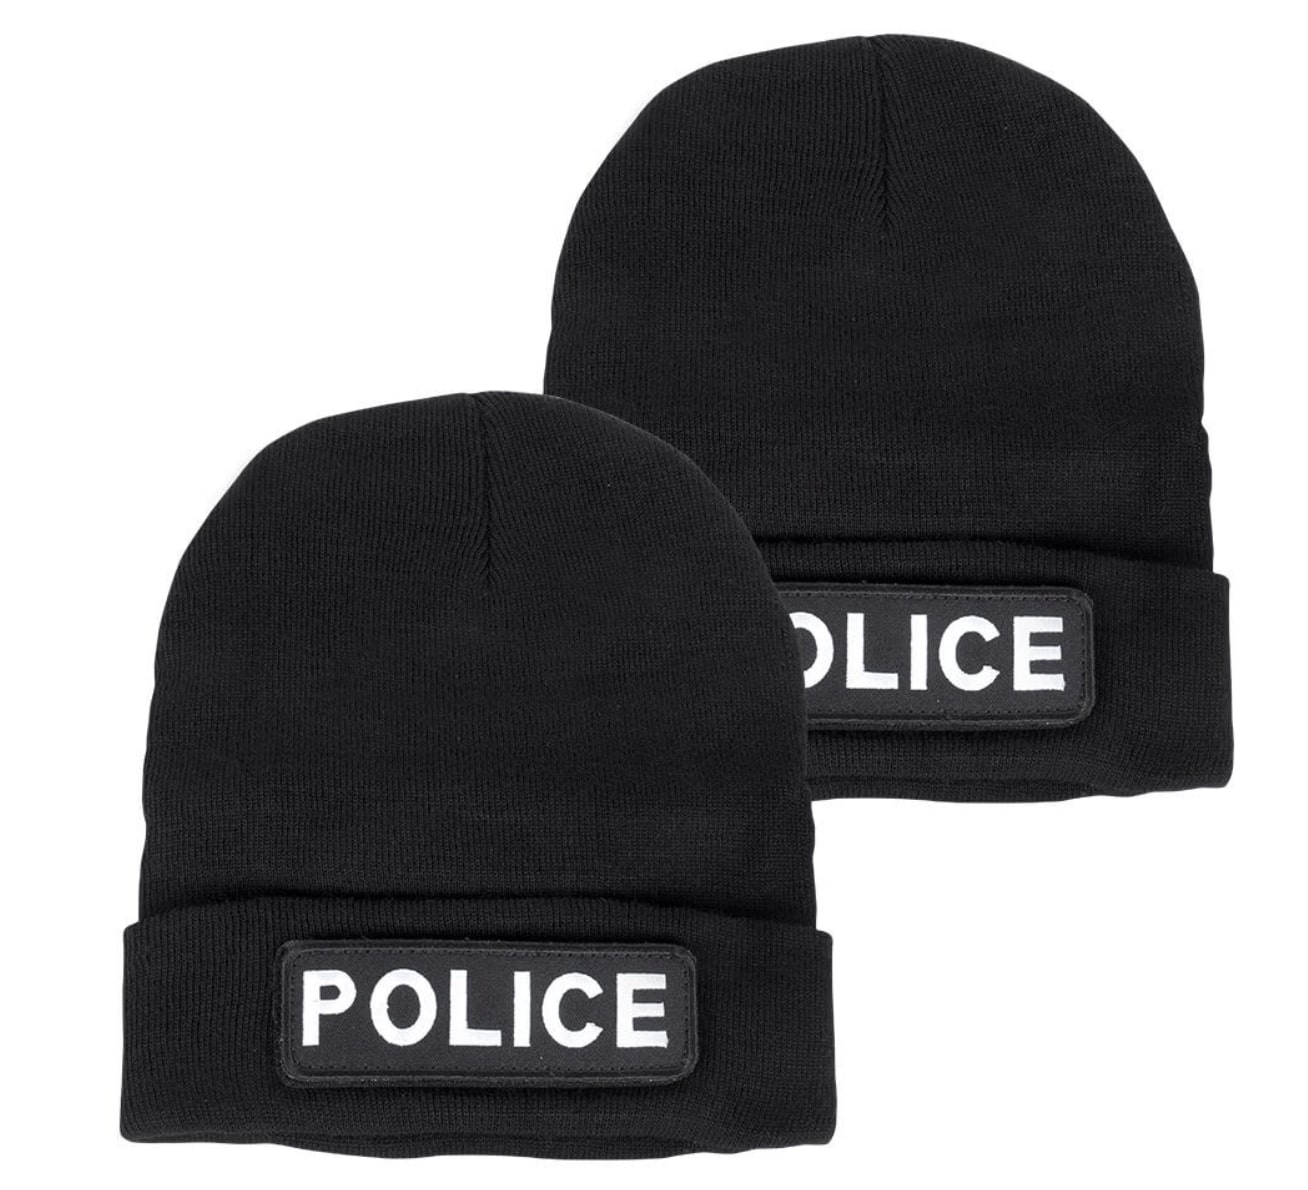 Black Police wolly hat